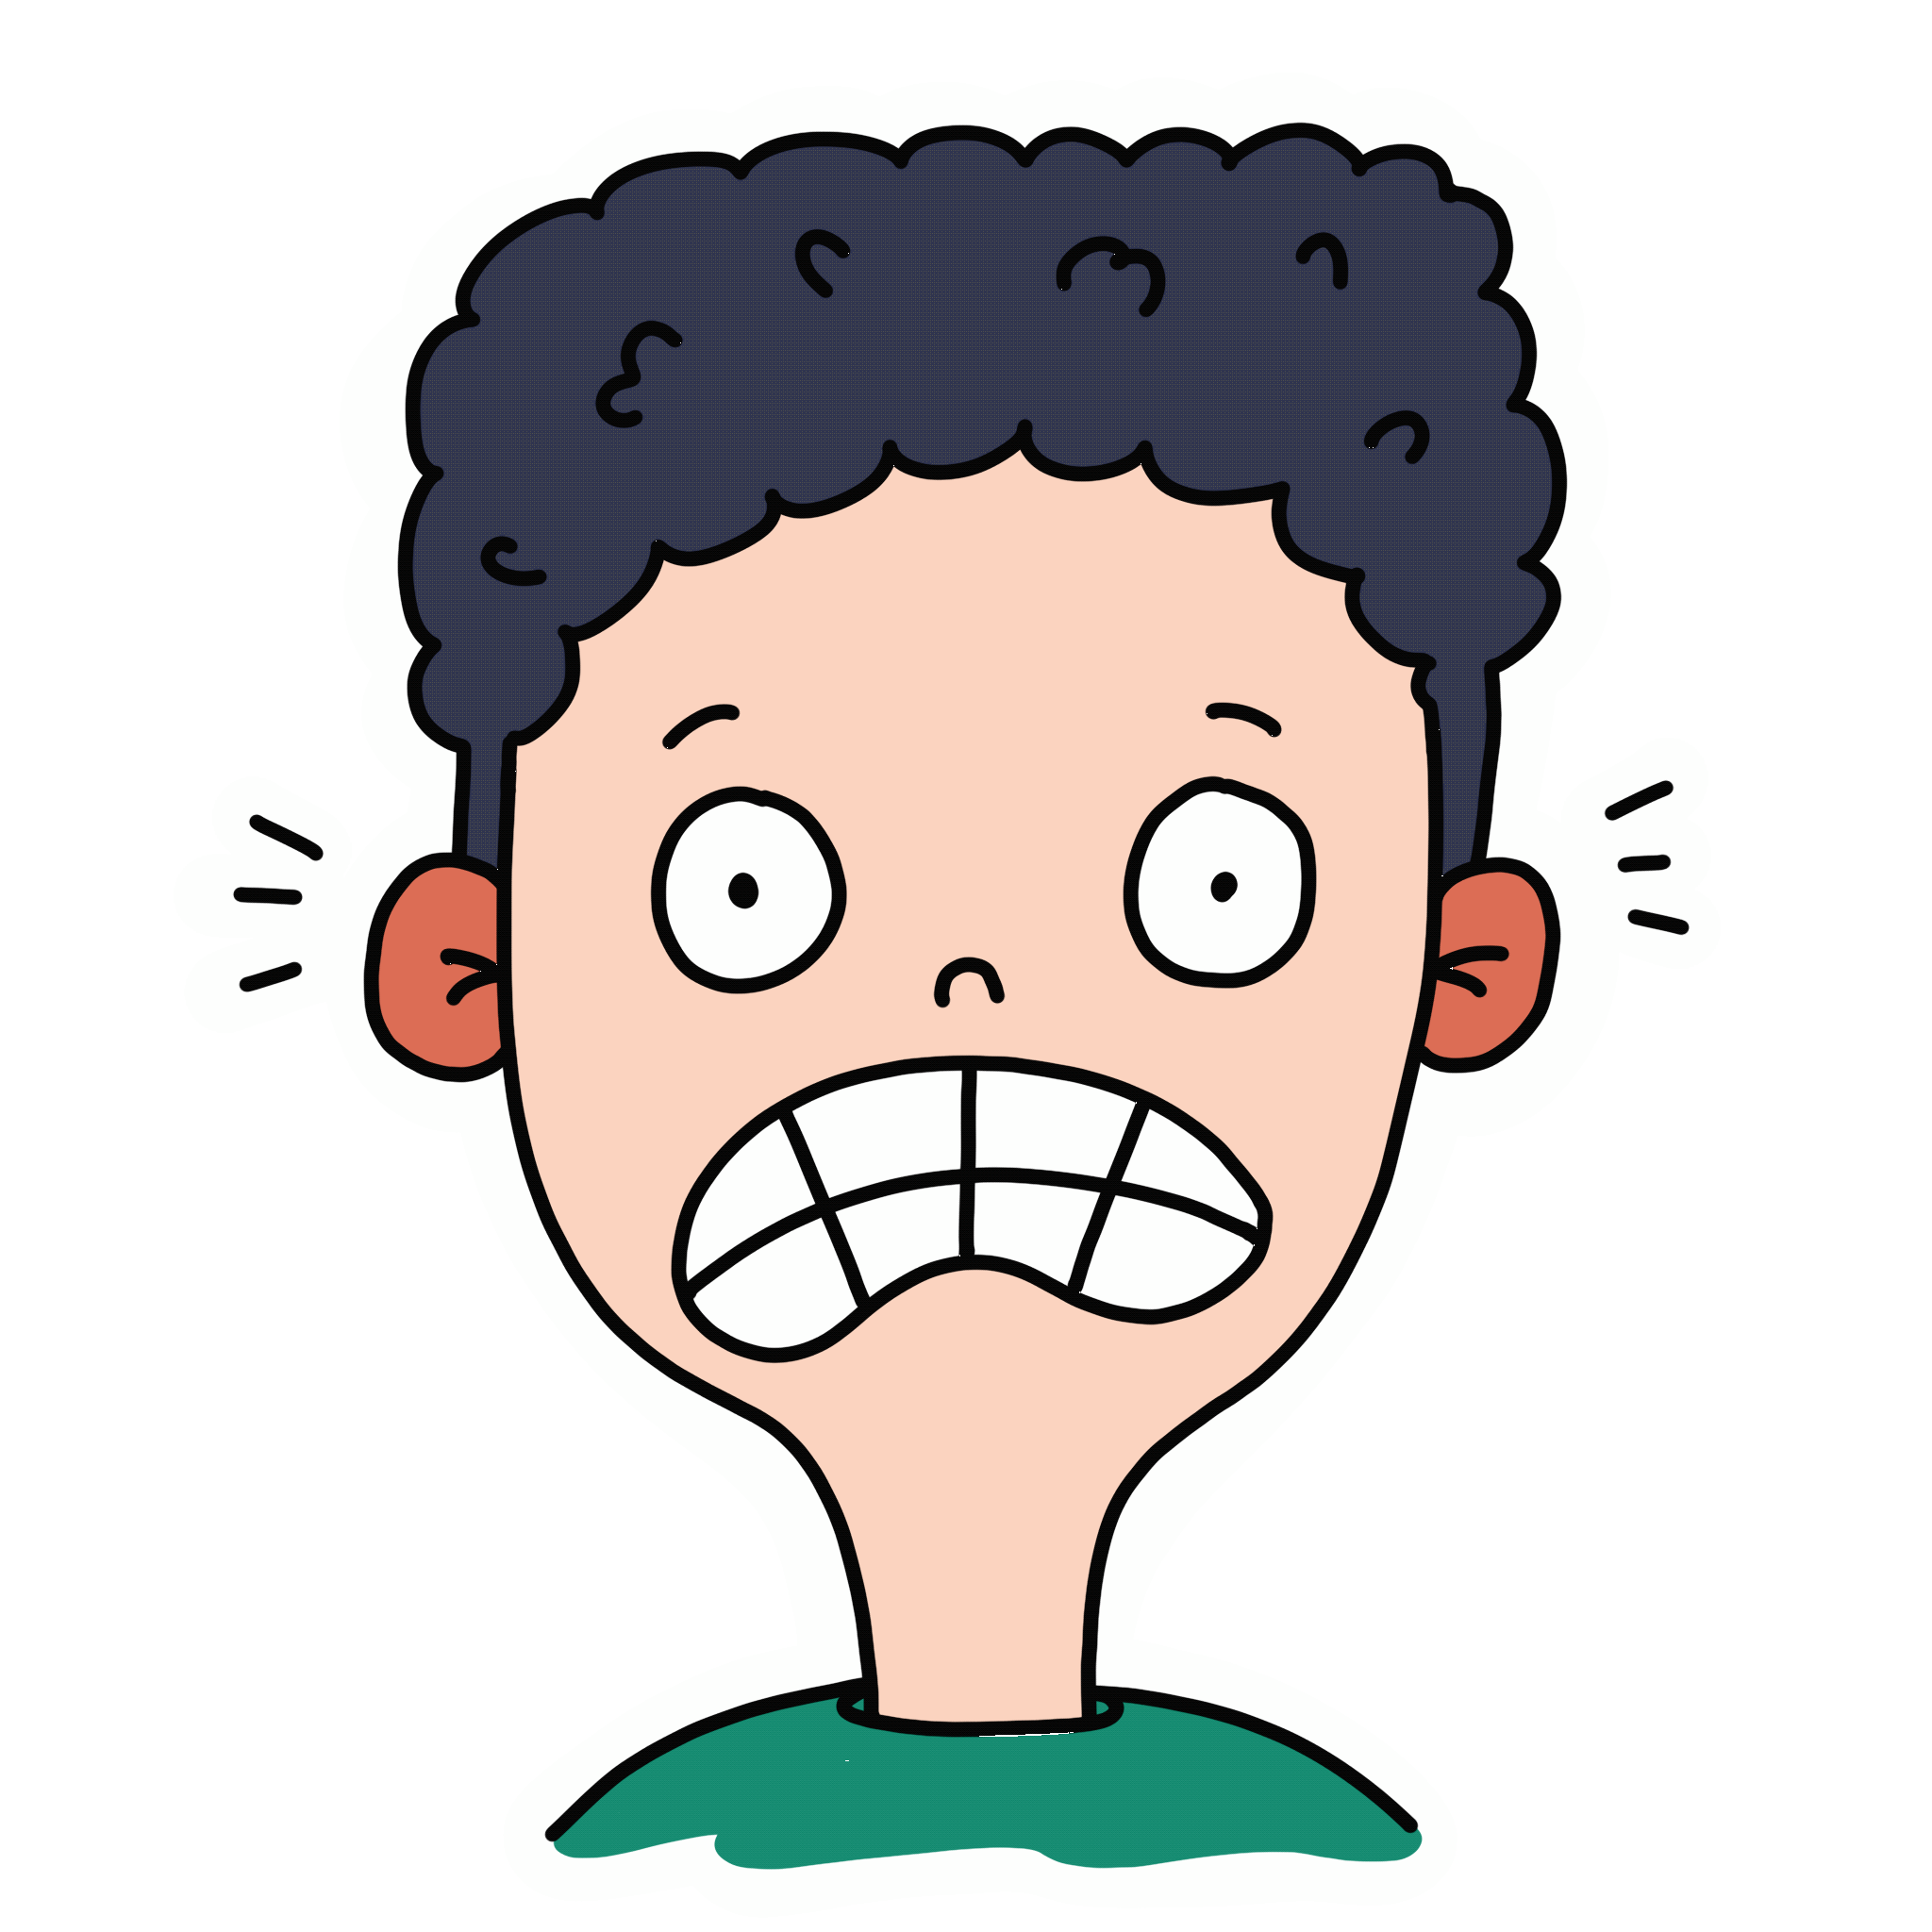 Scared Guy Sticker by Rafs Design for iOS & Android GIPHY